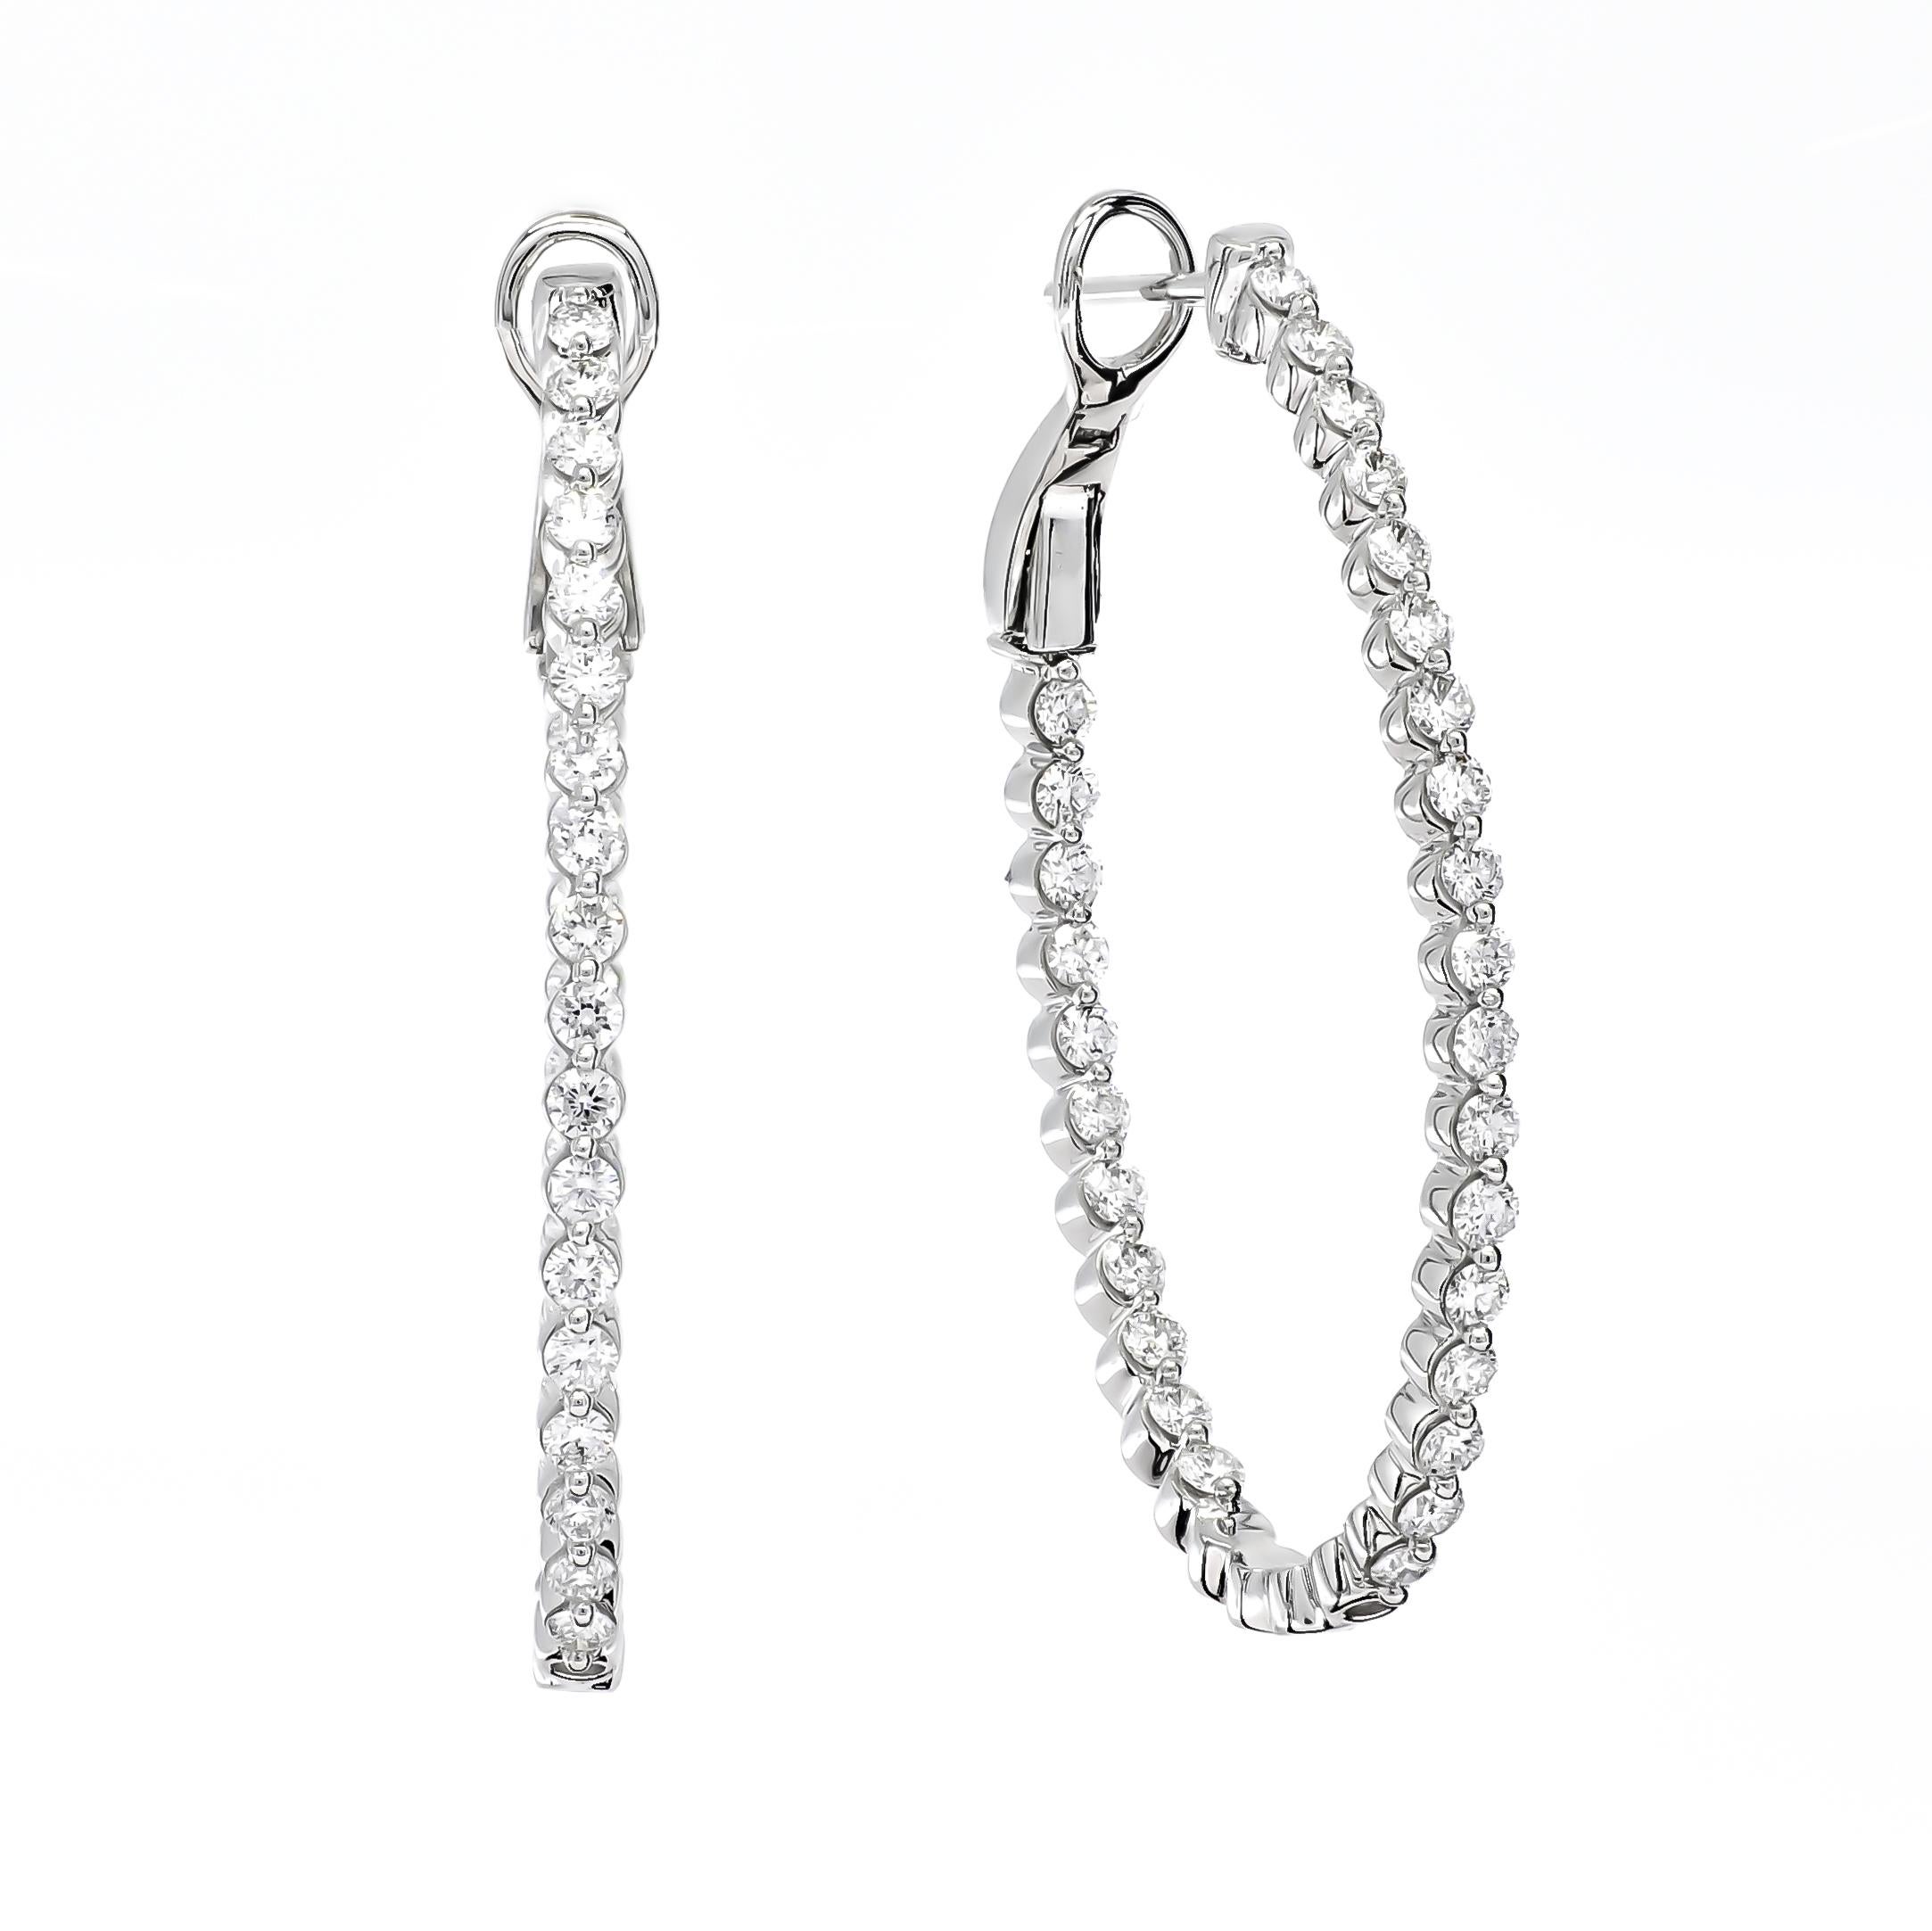 An Elegant 18 KT Set Hoop earring gives a dainty look! Diamond hoop earrings are a classic and tasteful choice for the sophisticated woman. So versatile, these hoops captivate diamonds and a bright polished shine in and out setting, giving it a